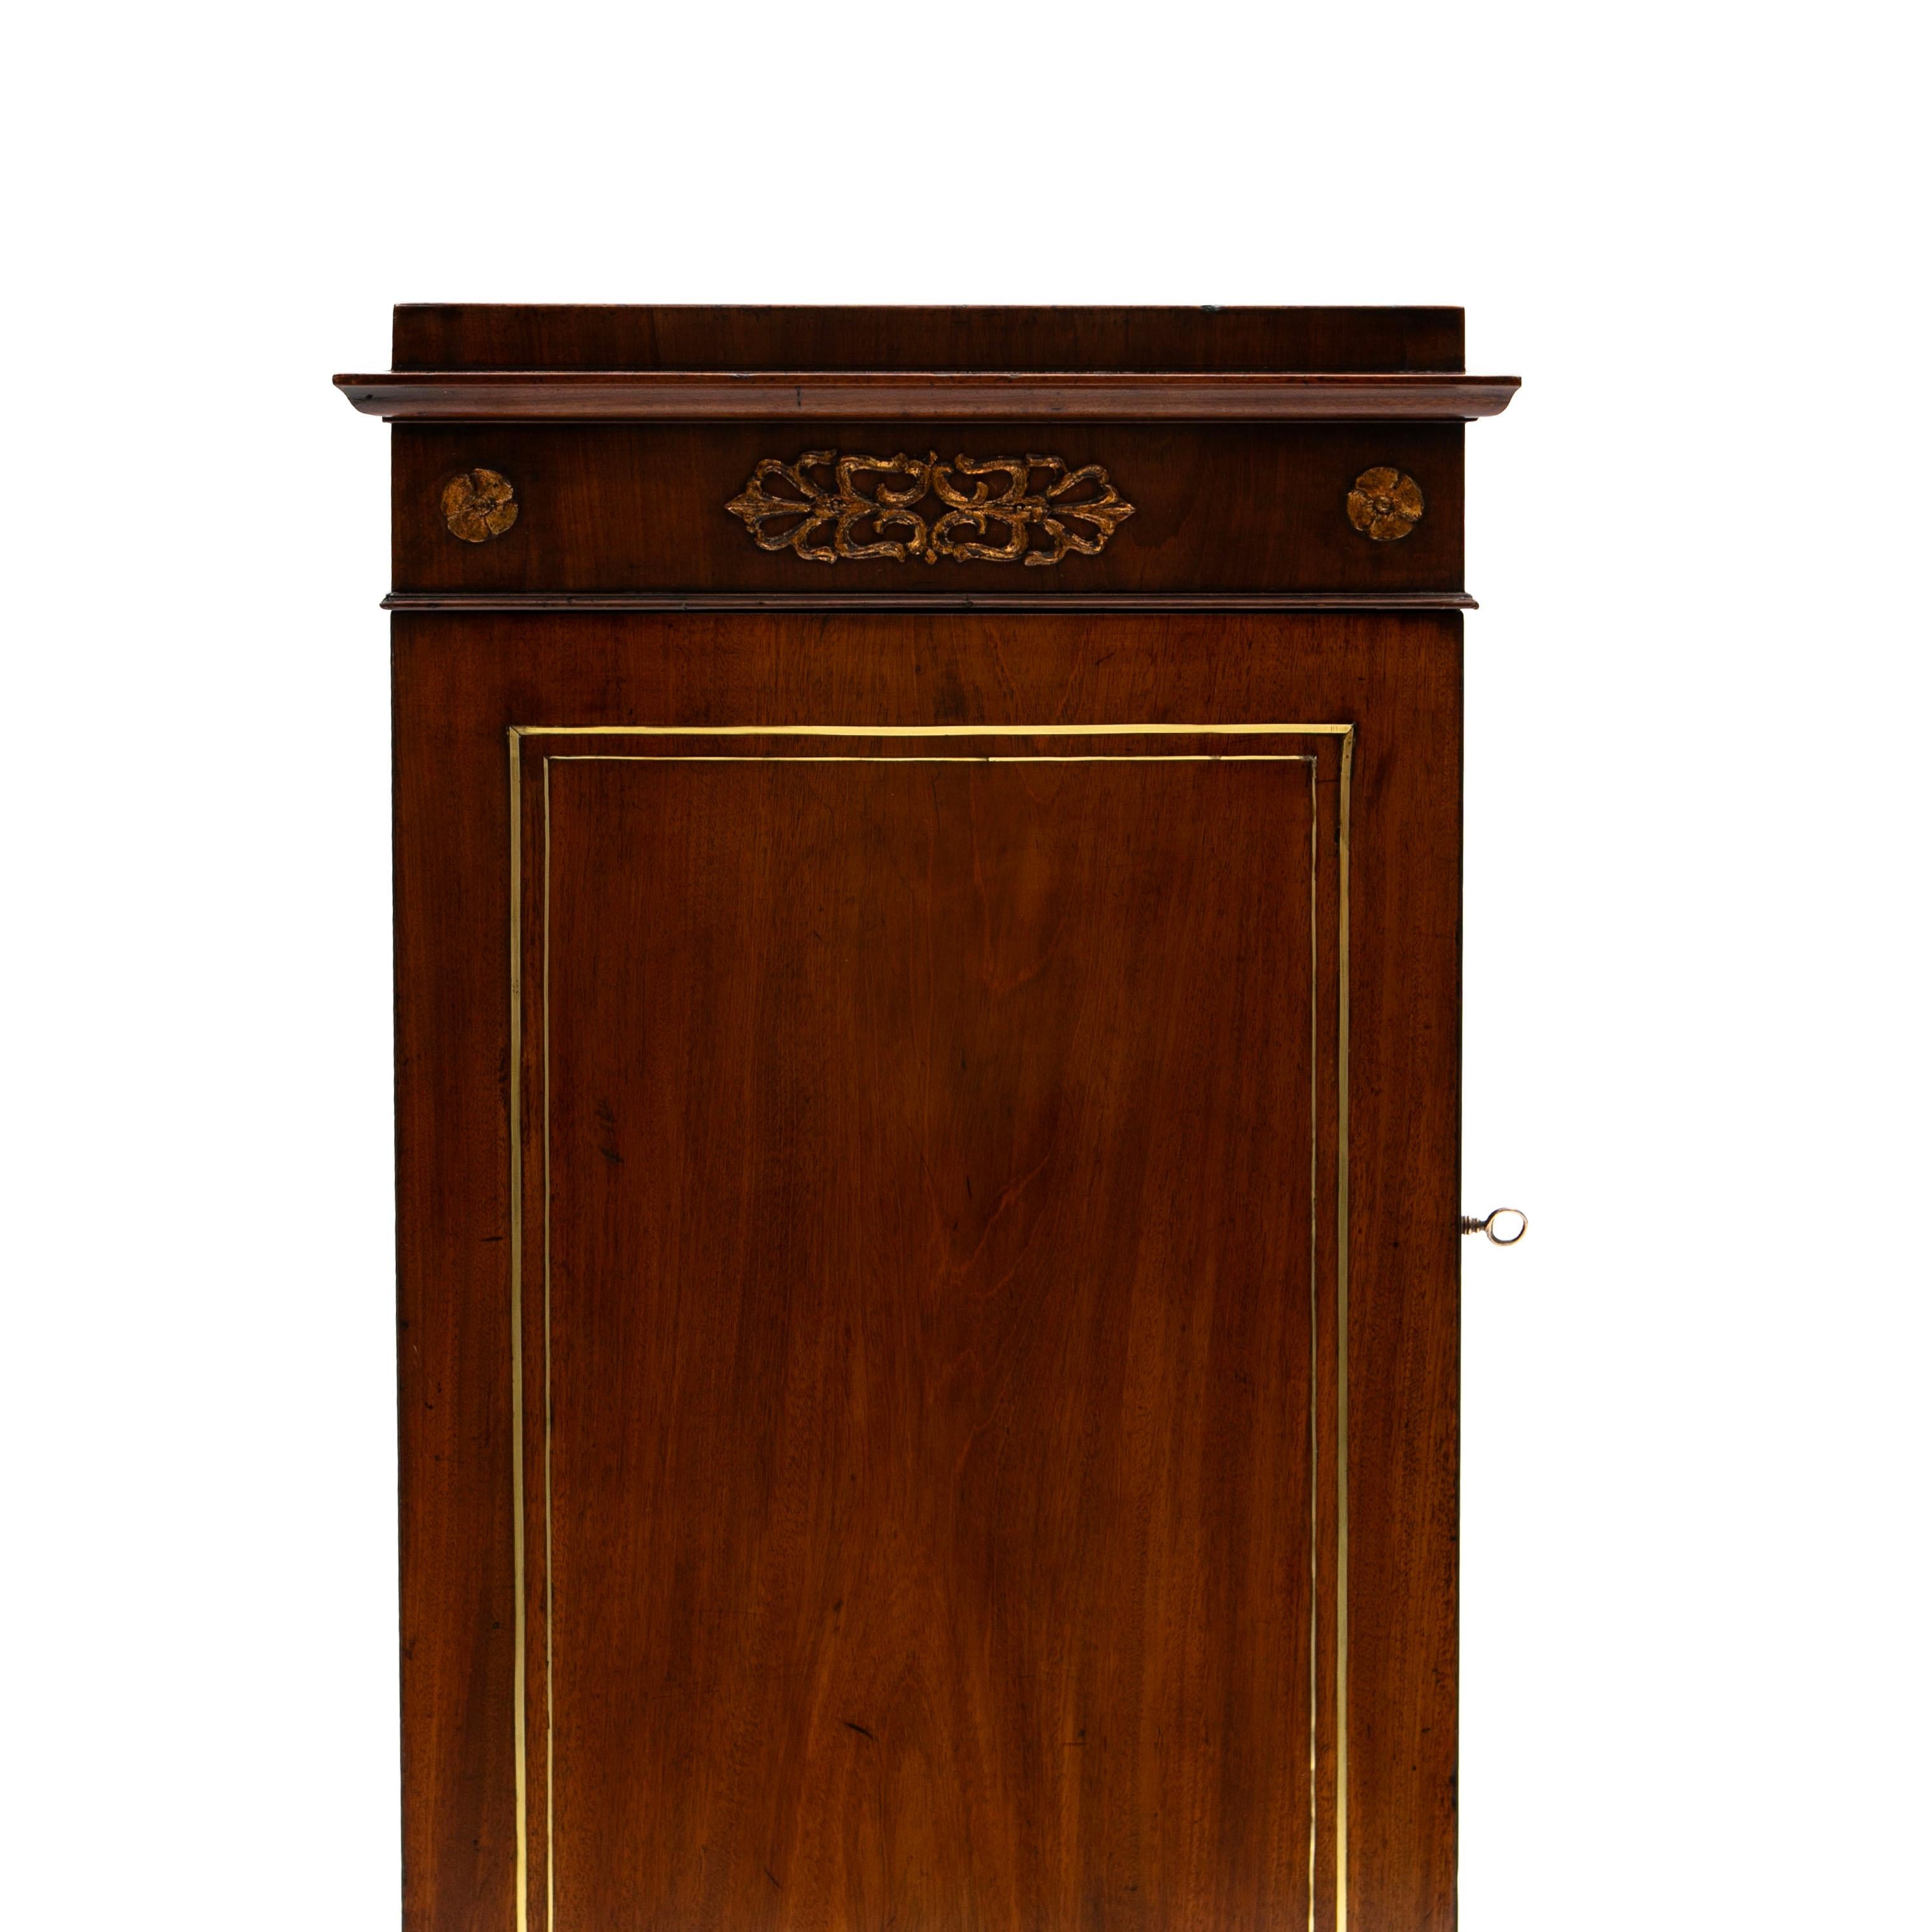 Brass Elegant Early 19th Century Empire Mahogany Pedestal Cabinet For Sale